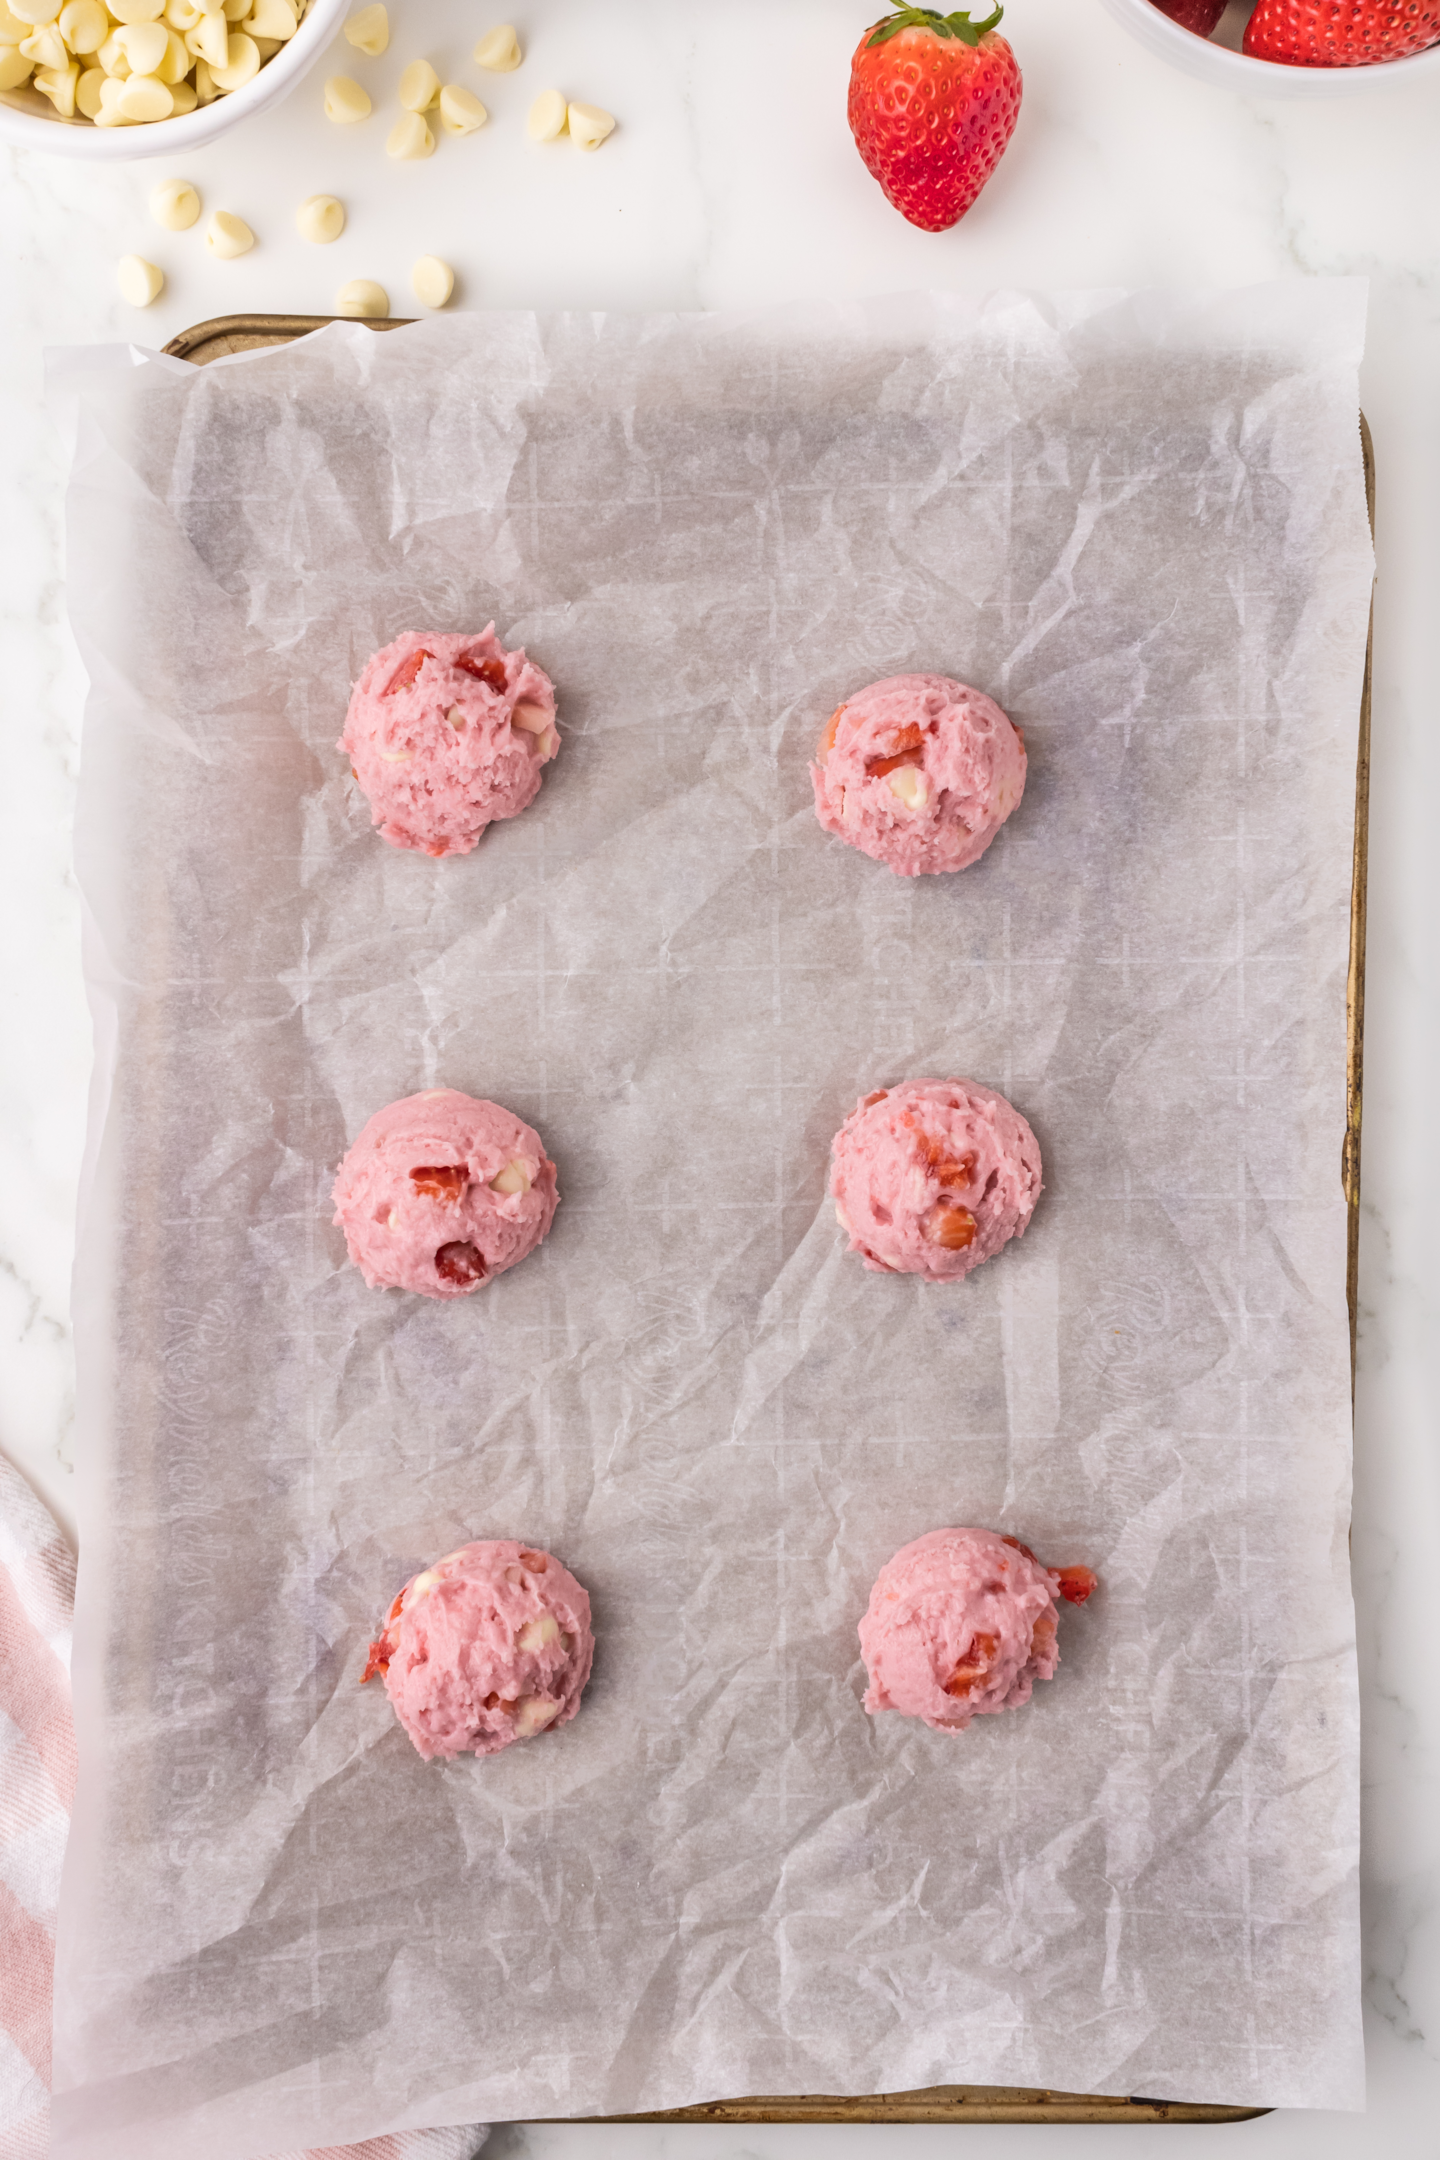 unbaked strawberry cookie dough balls on parchment paper baking sheet